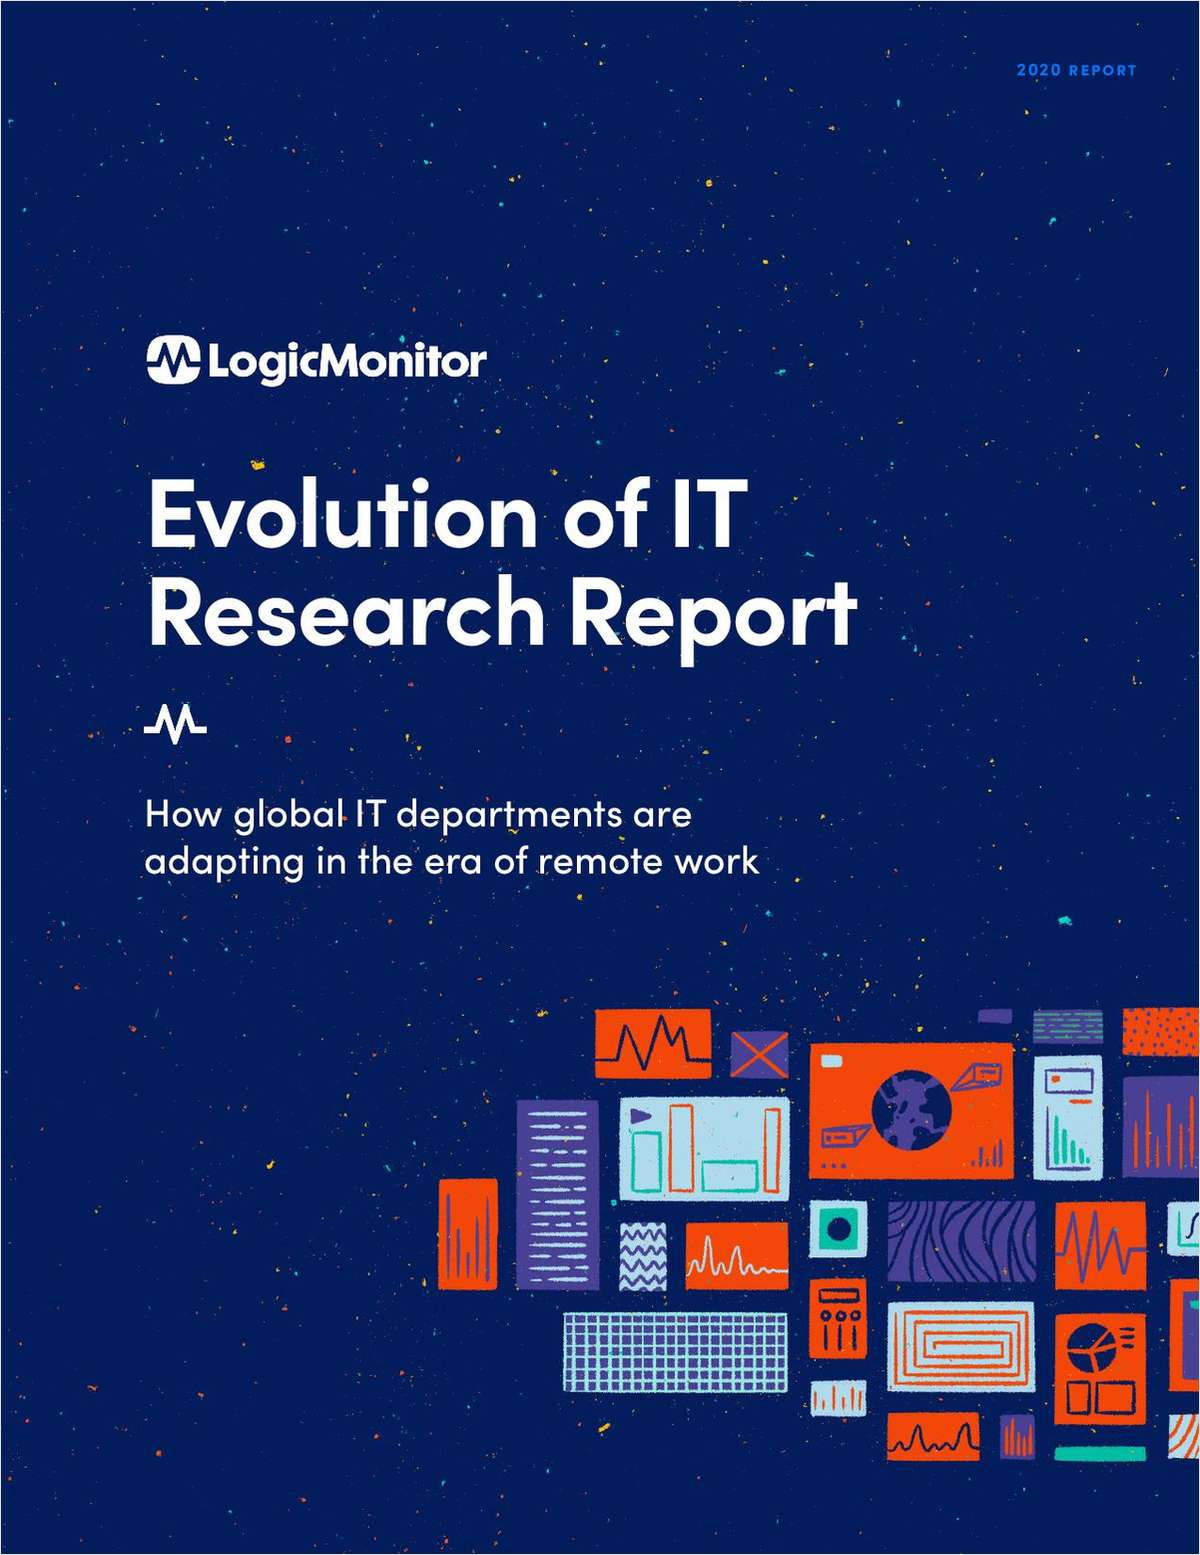 Evolution of IT Research Report